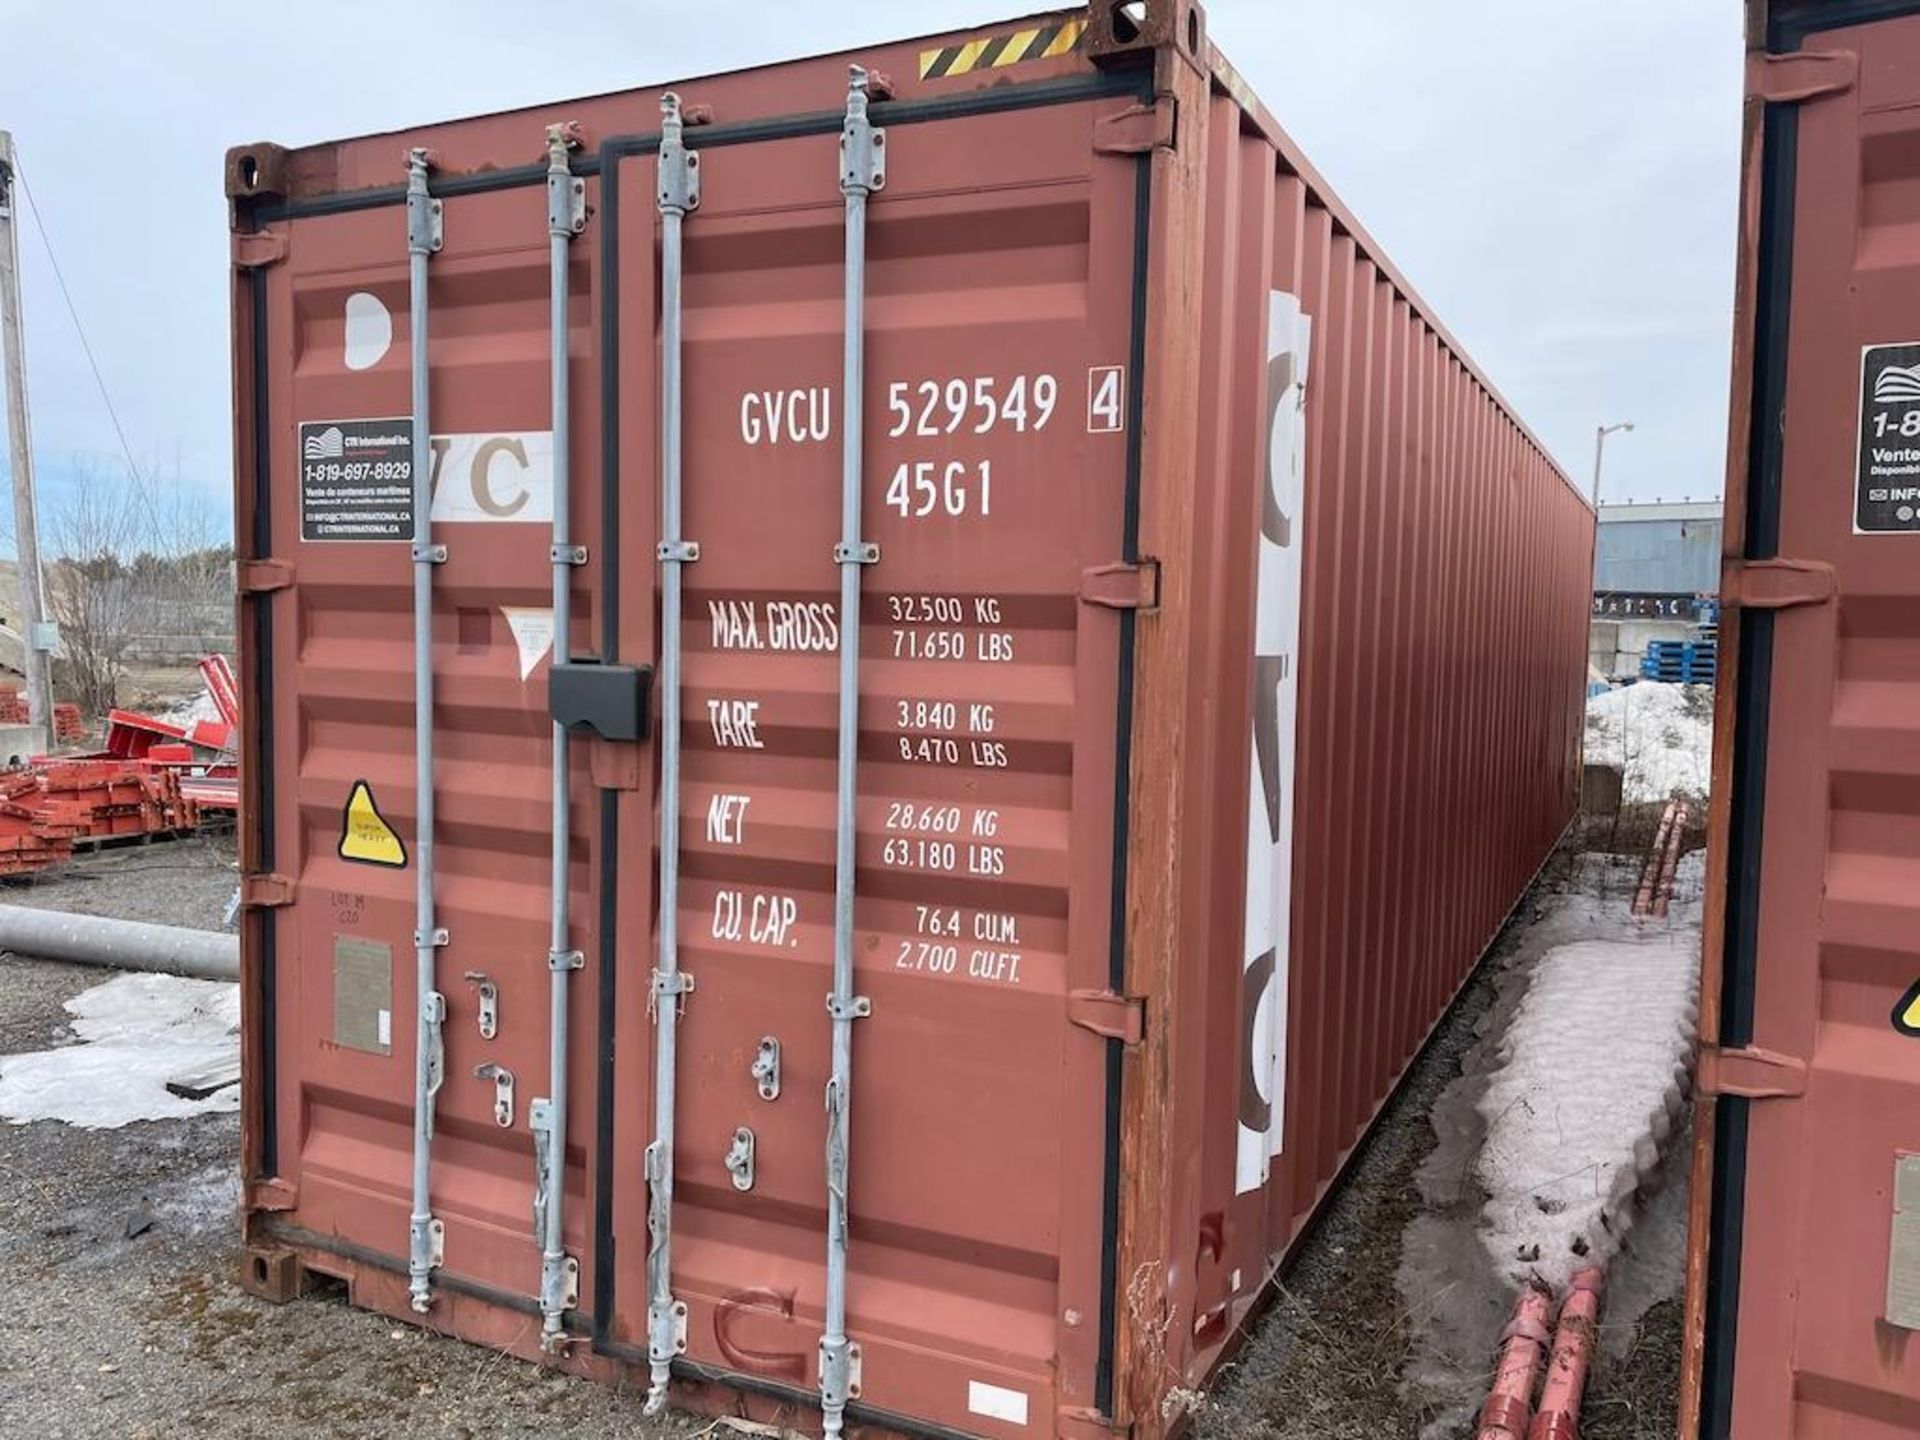 40 FT SEA CONTAINER, EXCLUDING CONTENTS, DELAYED PICK UP UNTIL MAY 13 [20] [TROIS RIVIERES] *PLEASE - Image 3 of 3